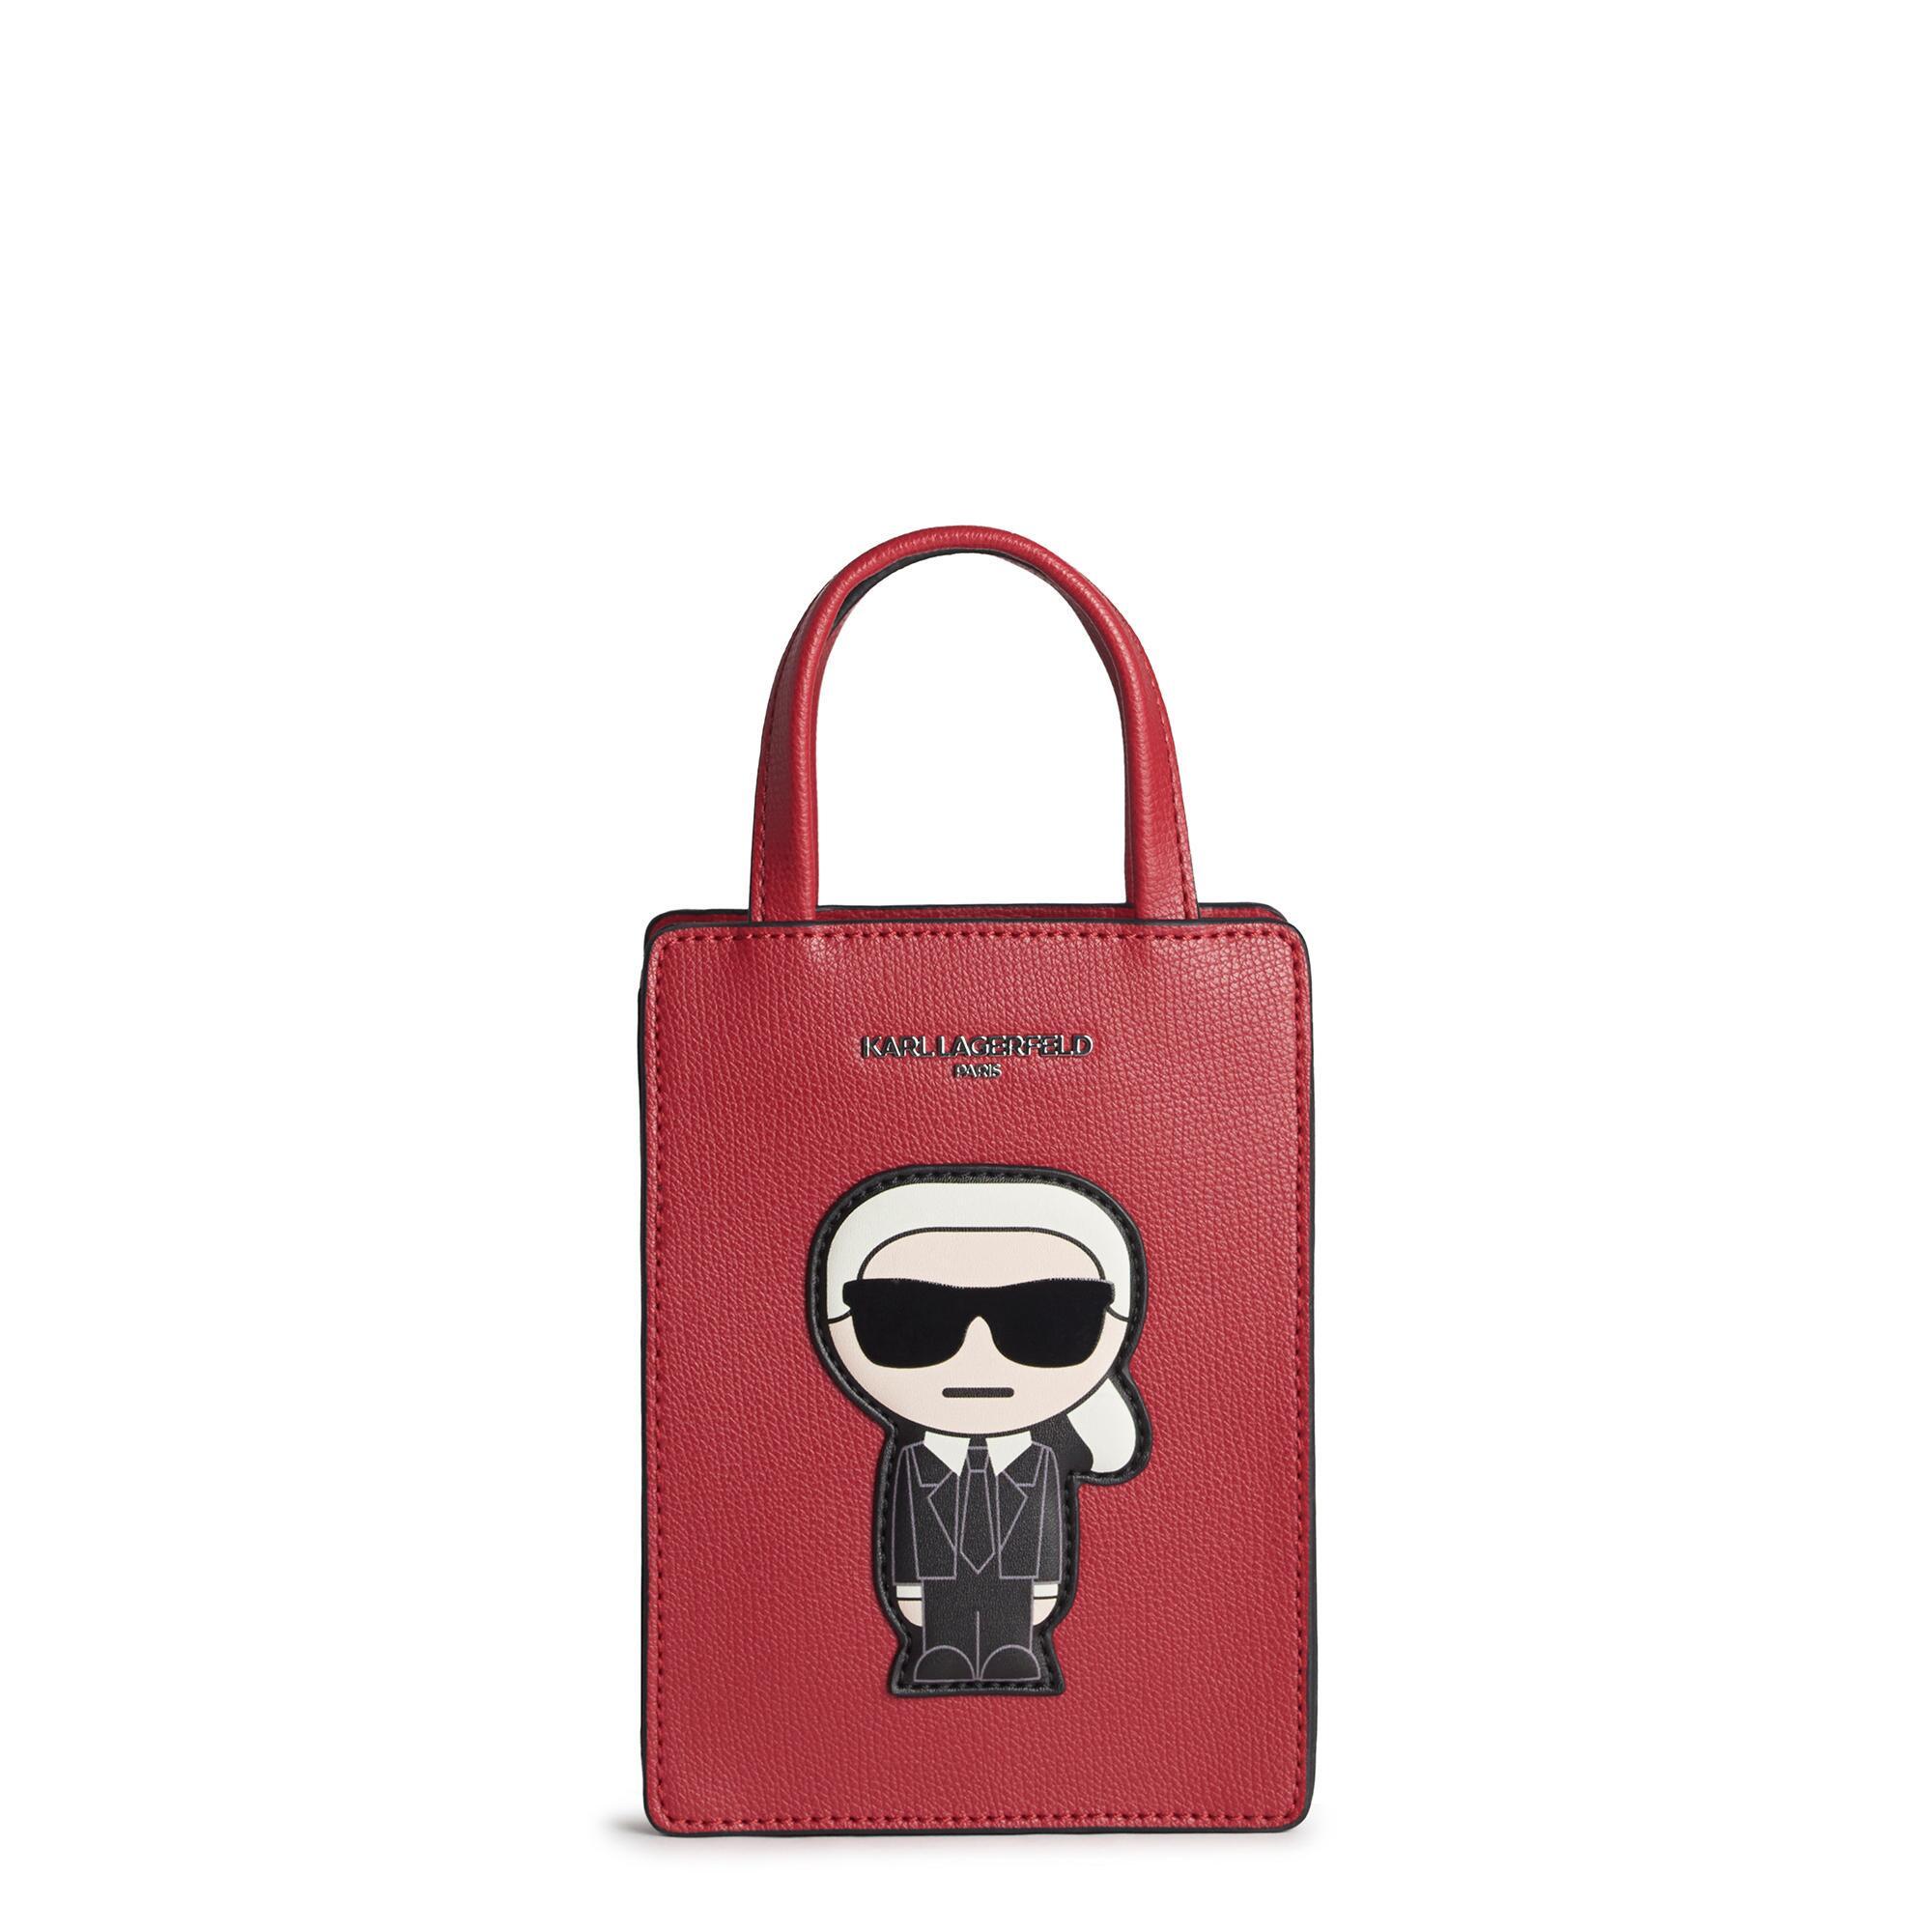 Karl Lagerfeld Maybelle Cell Phone Bag in Red | Lyst